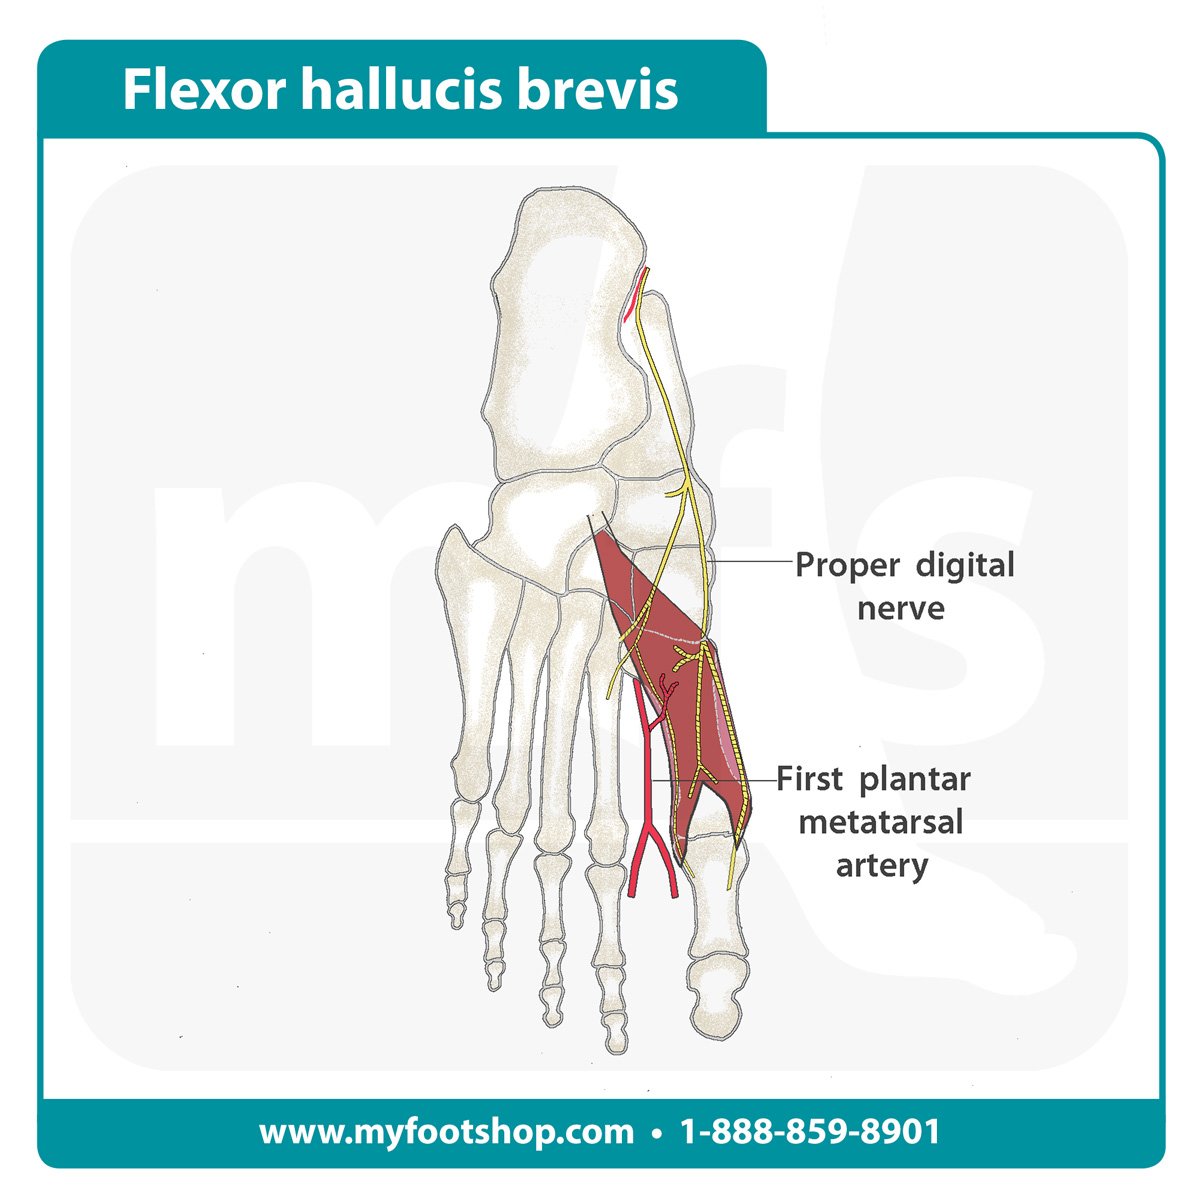 Image of the flexor hallucis brevis muscle